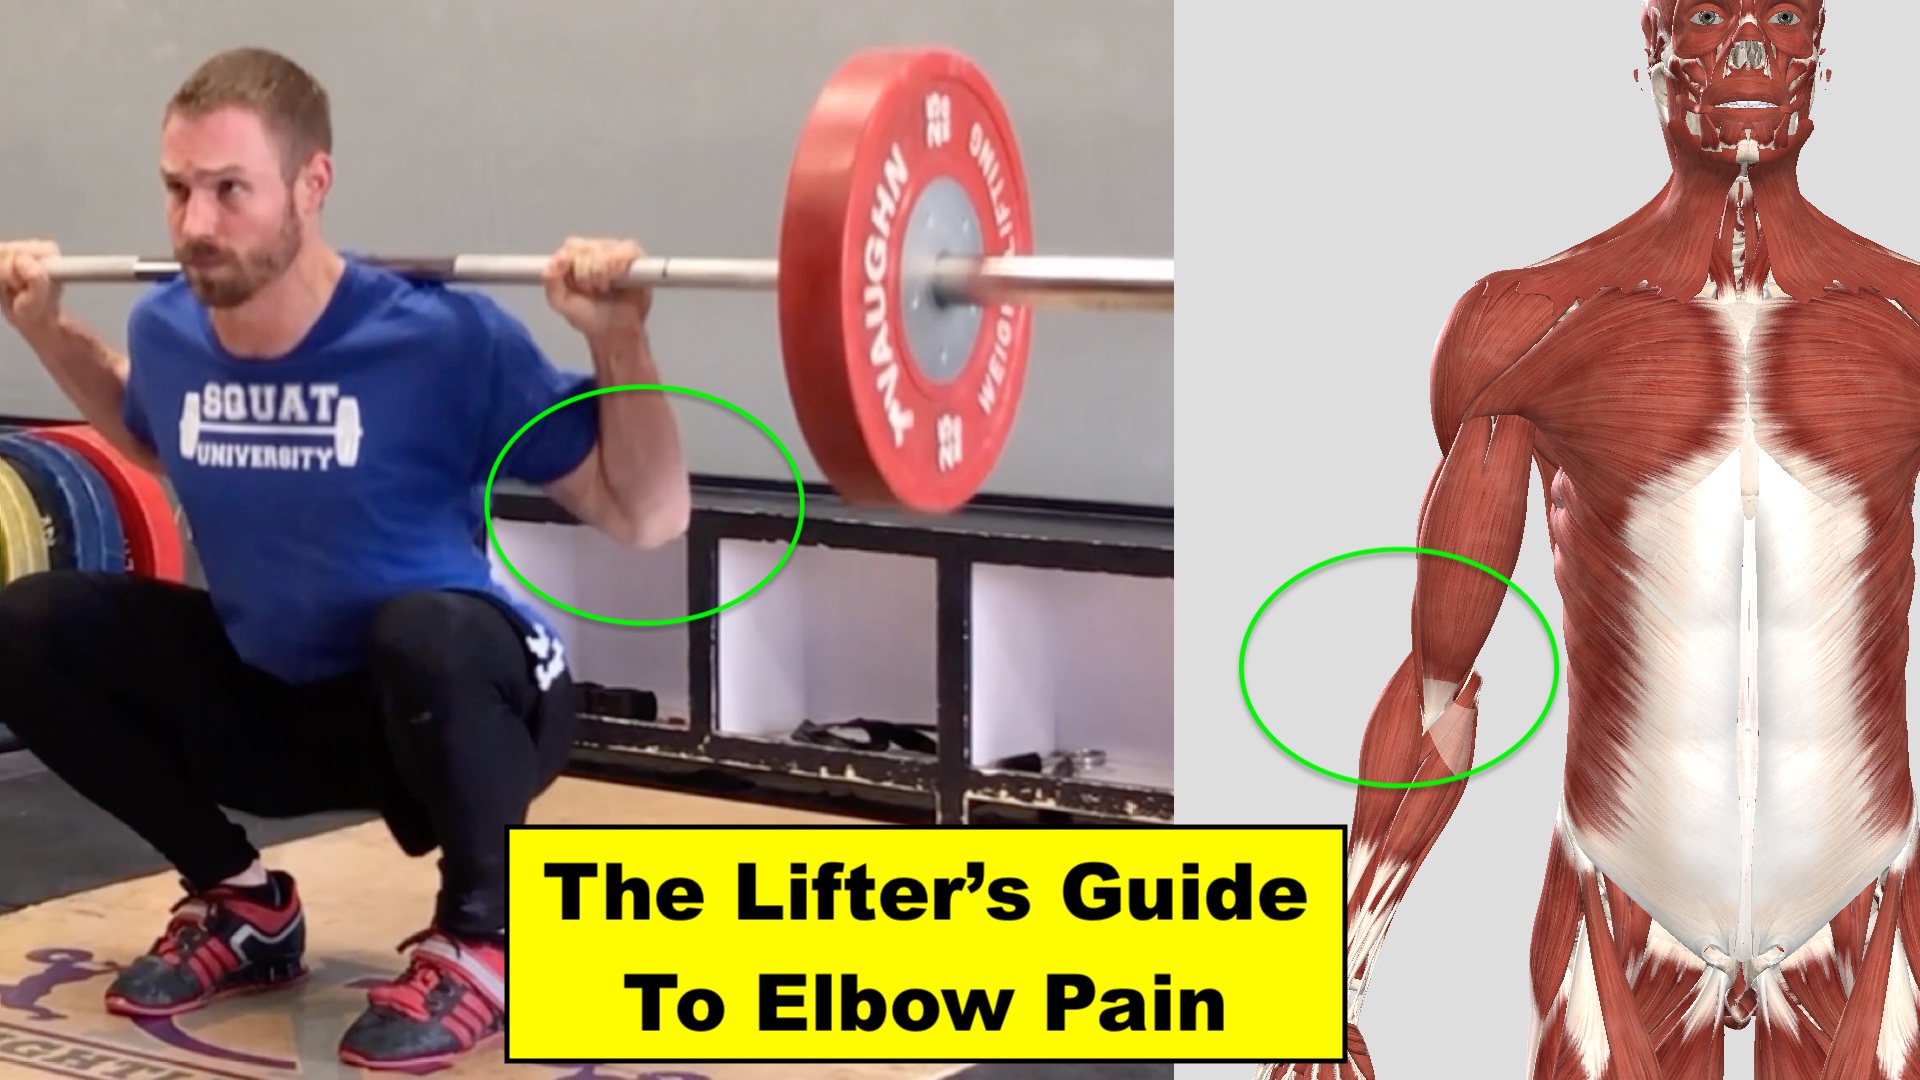 The Lifter's Guide To Elbow Pain – Squat University